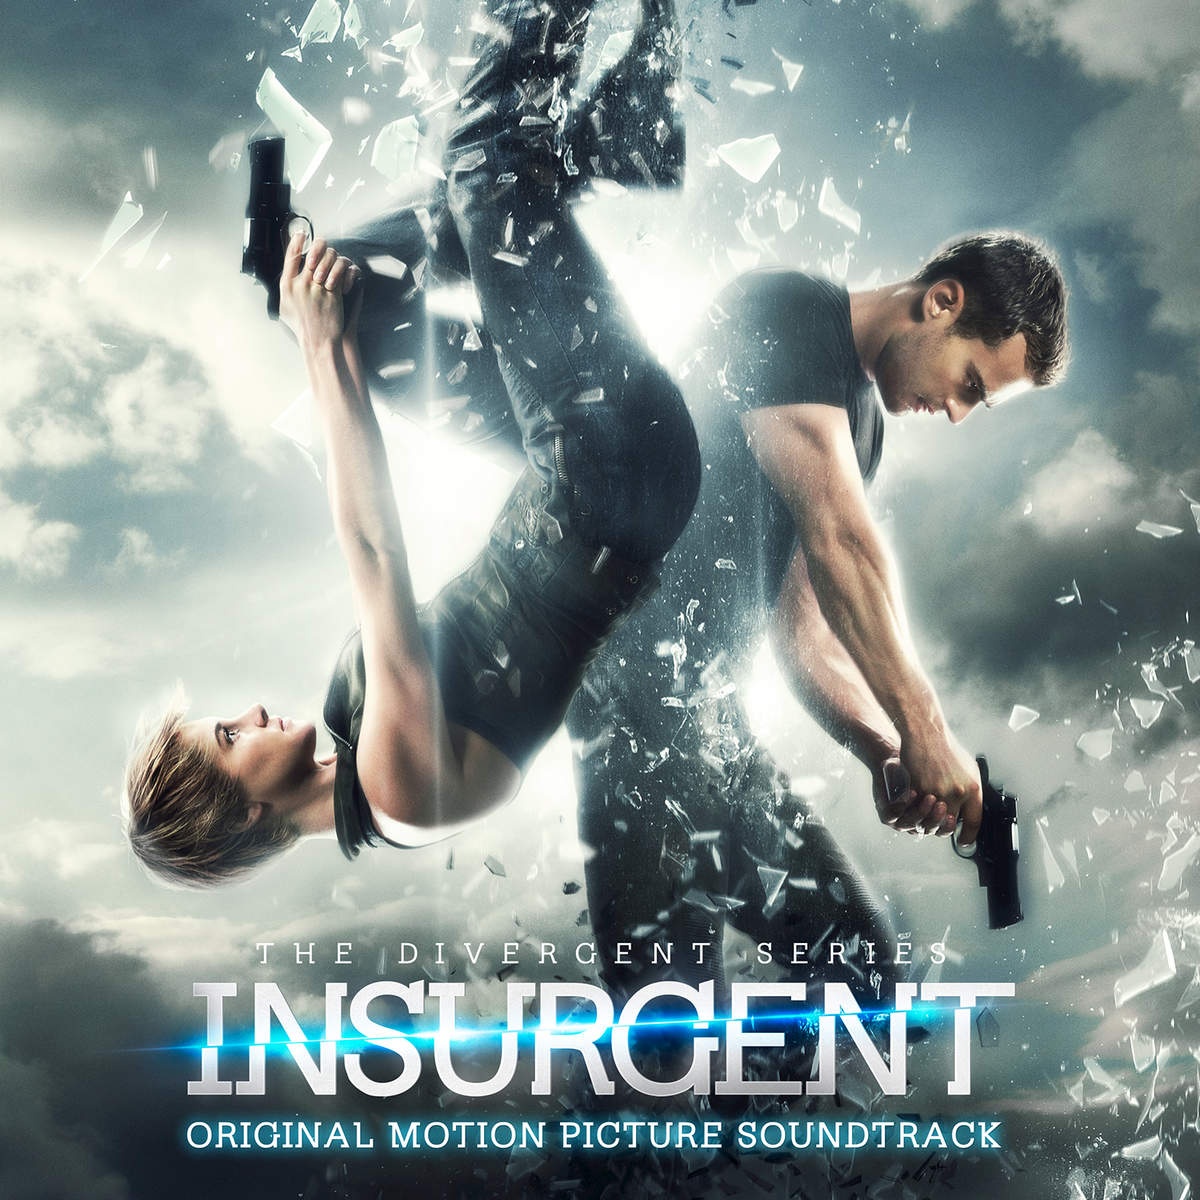 Never Let You Down (feat. Lykke Li) [From The "Insurgent" Soundtrack]